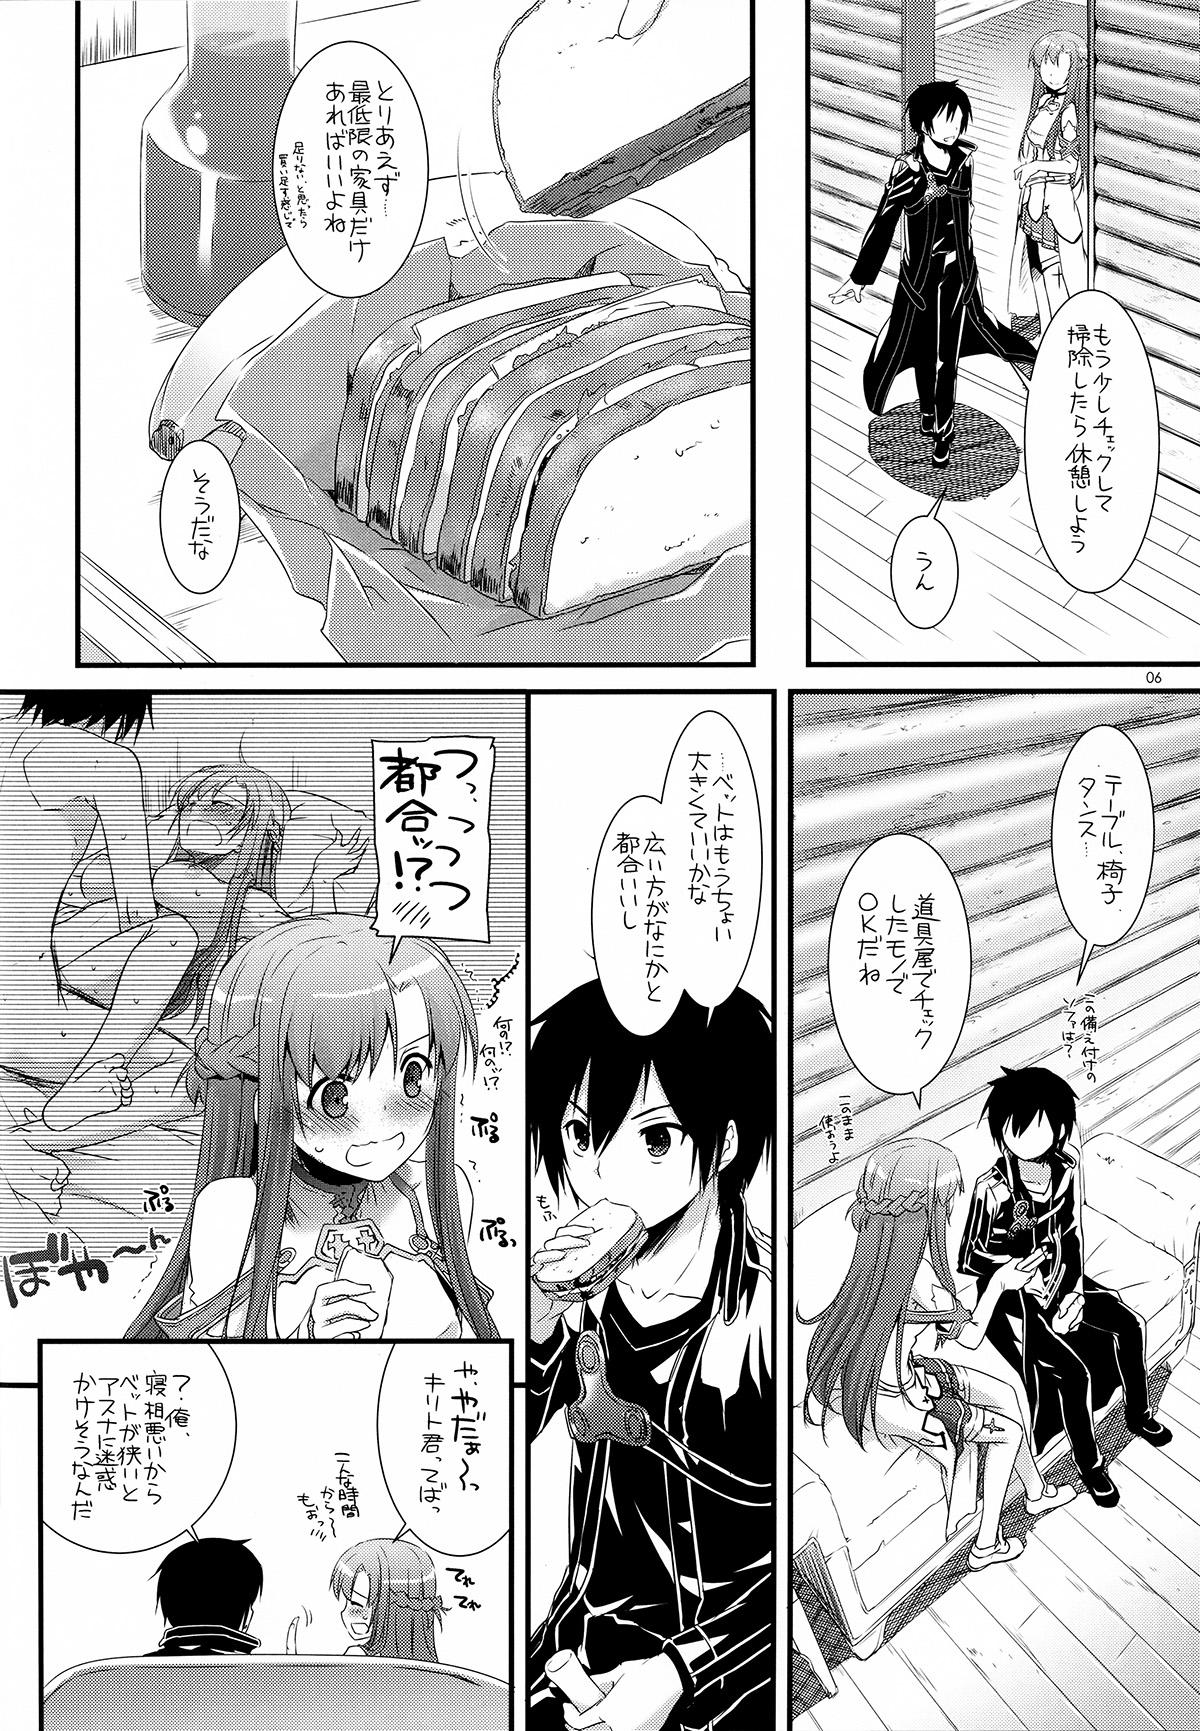 Gay Reality D.L.action 71 - Sword art online Gay Bang - Page 6